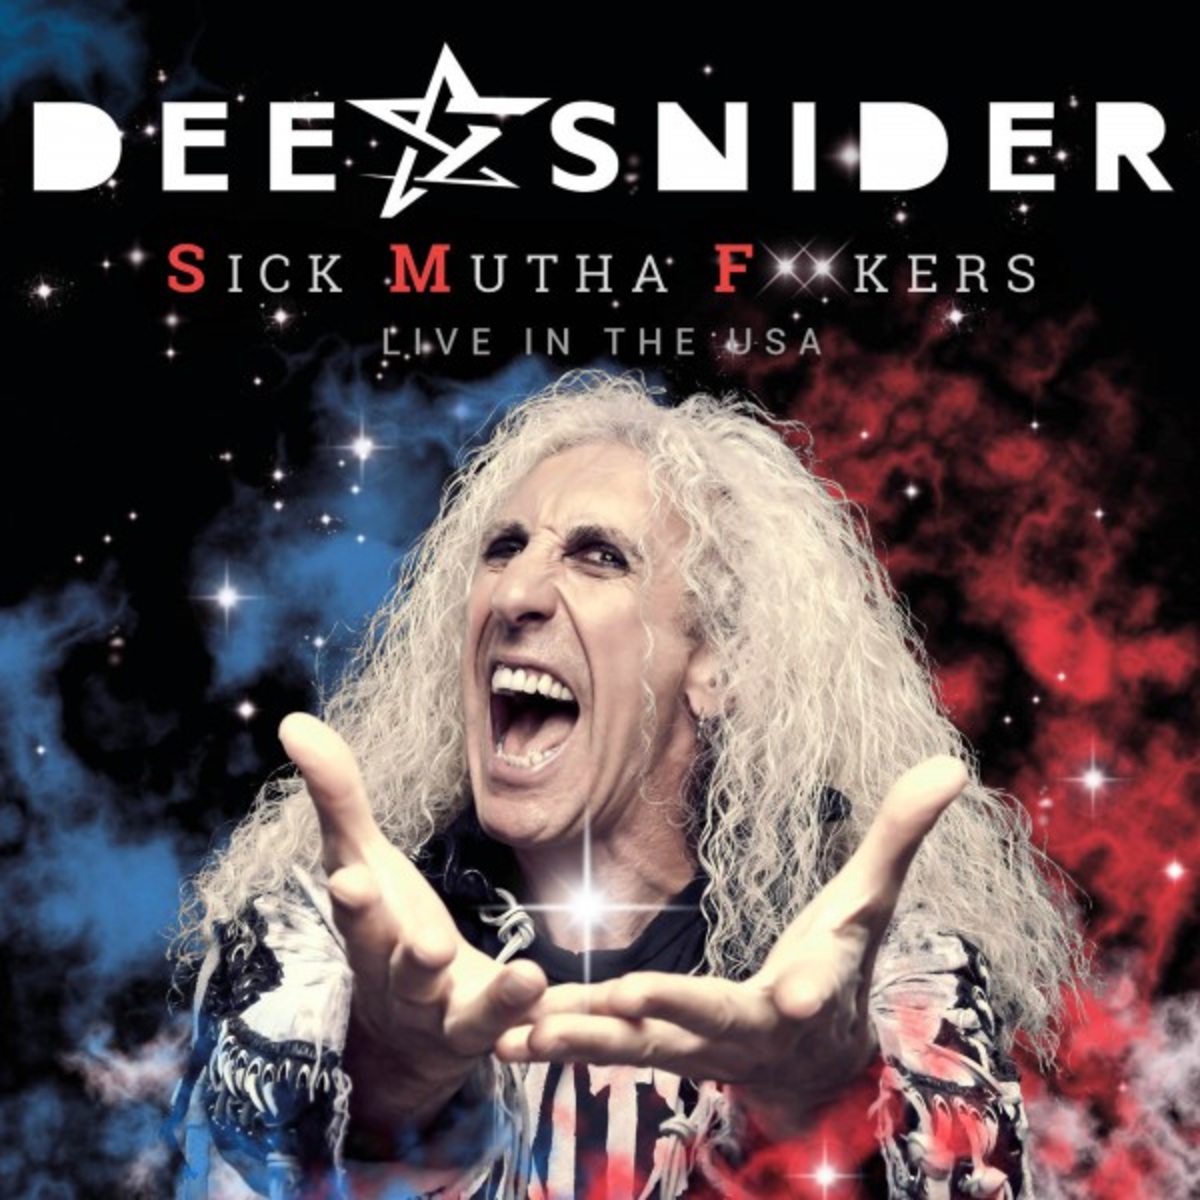 DEE SNIDER (USA) – Sick Mutha F**kers (Live In The USA)